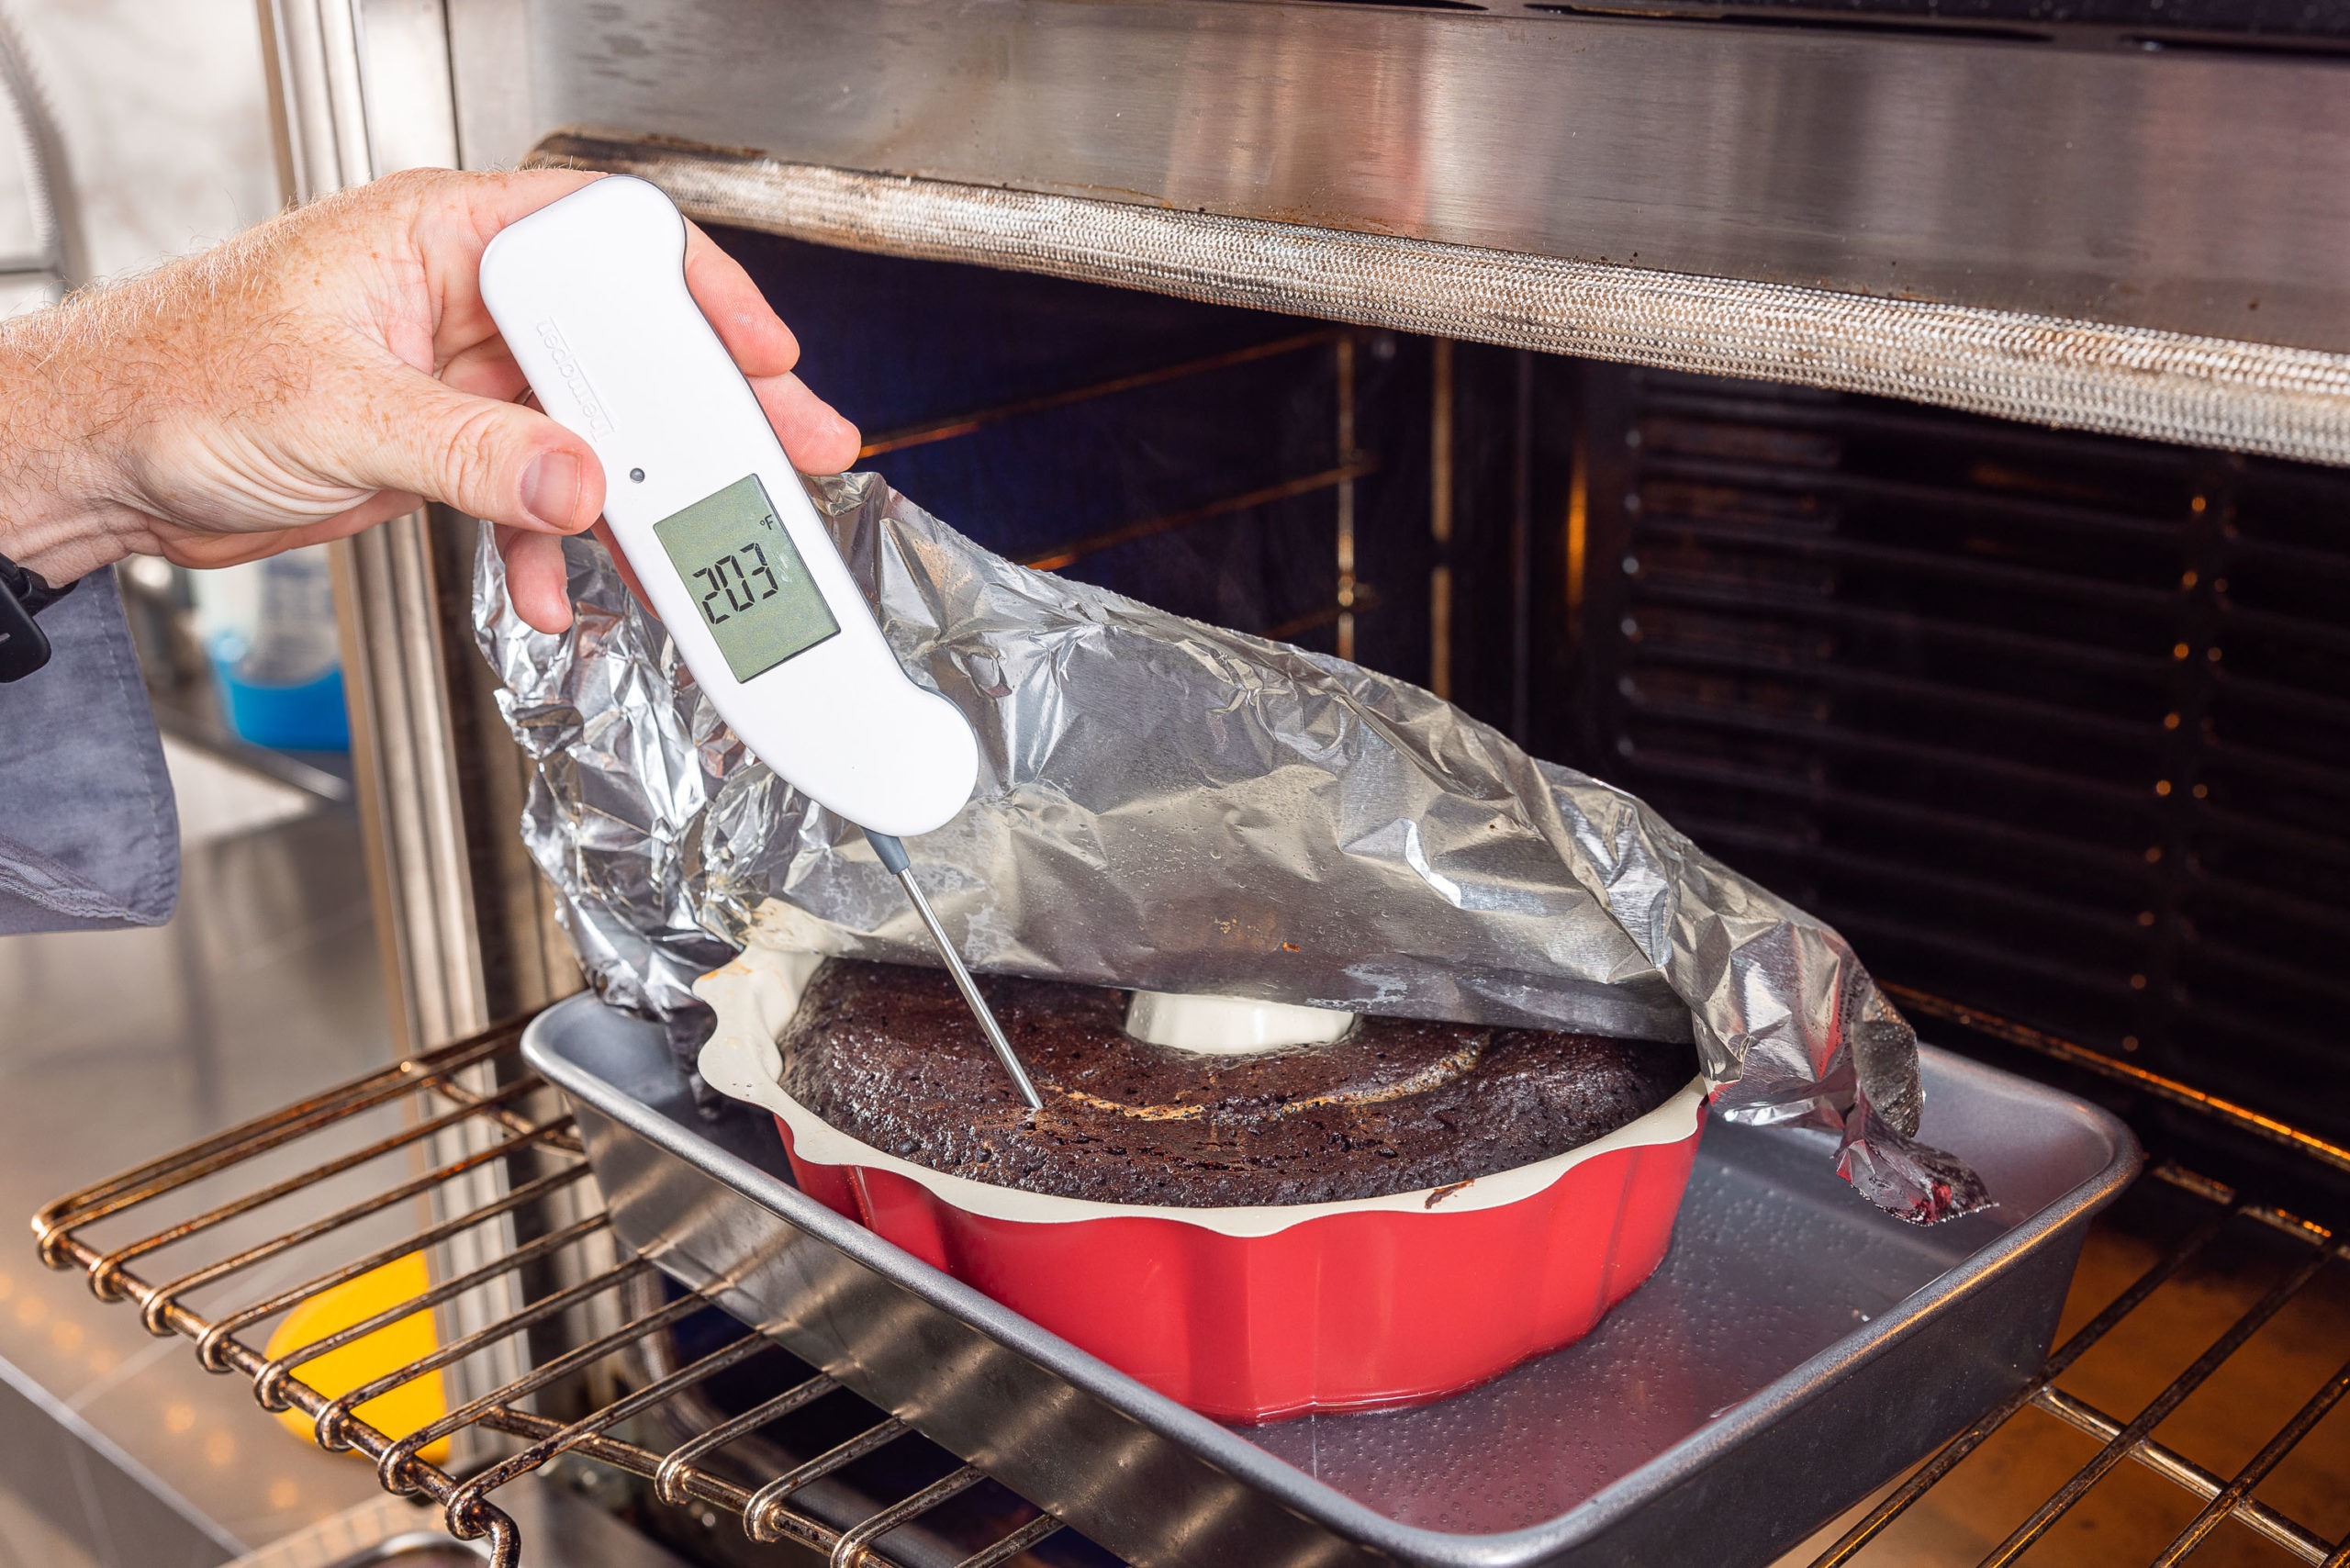 Chocoflan: Baking and Doneness Temperatures for a Baking Magic